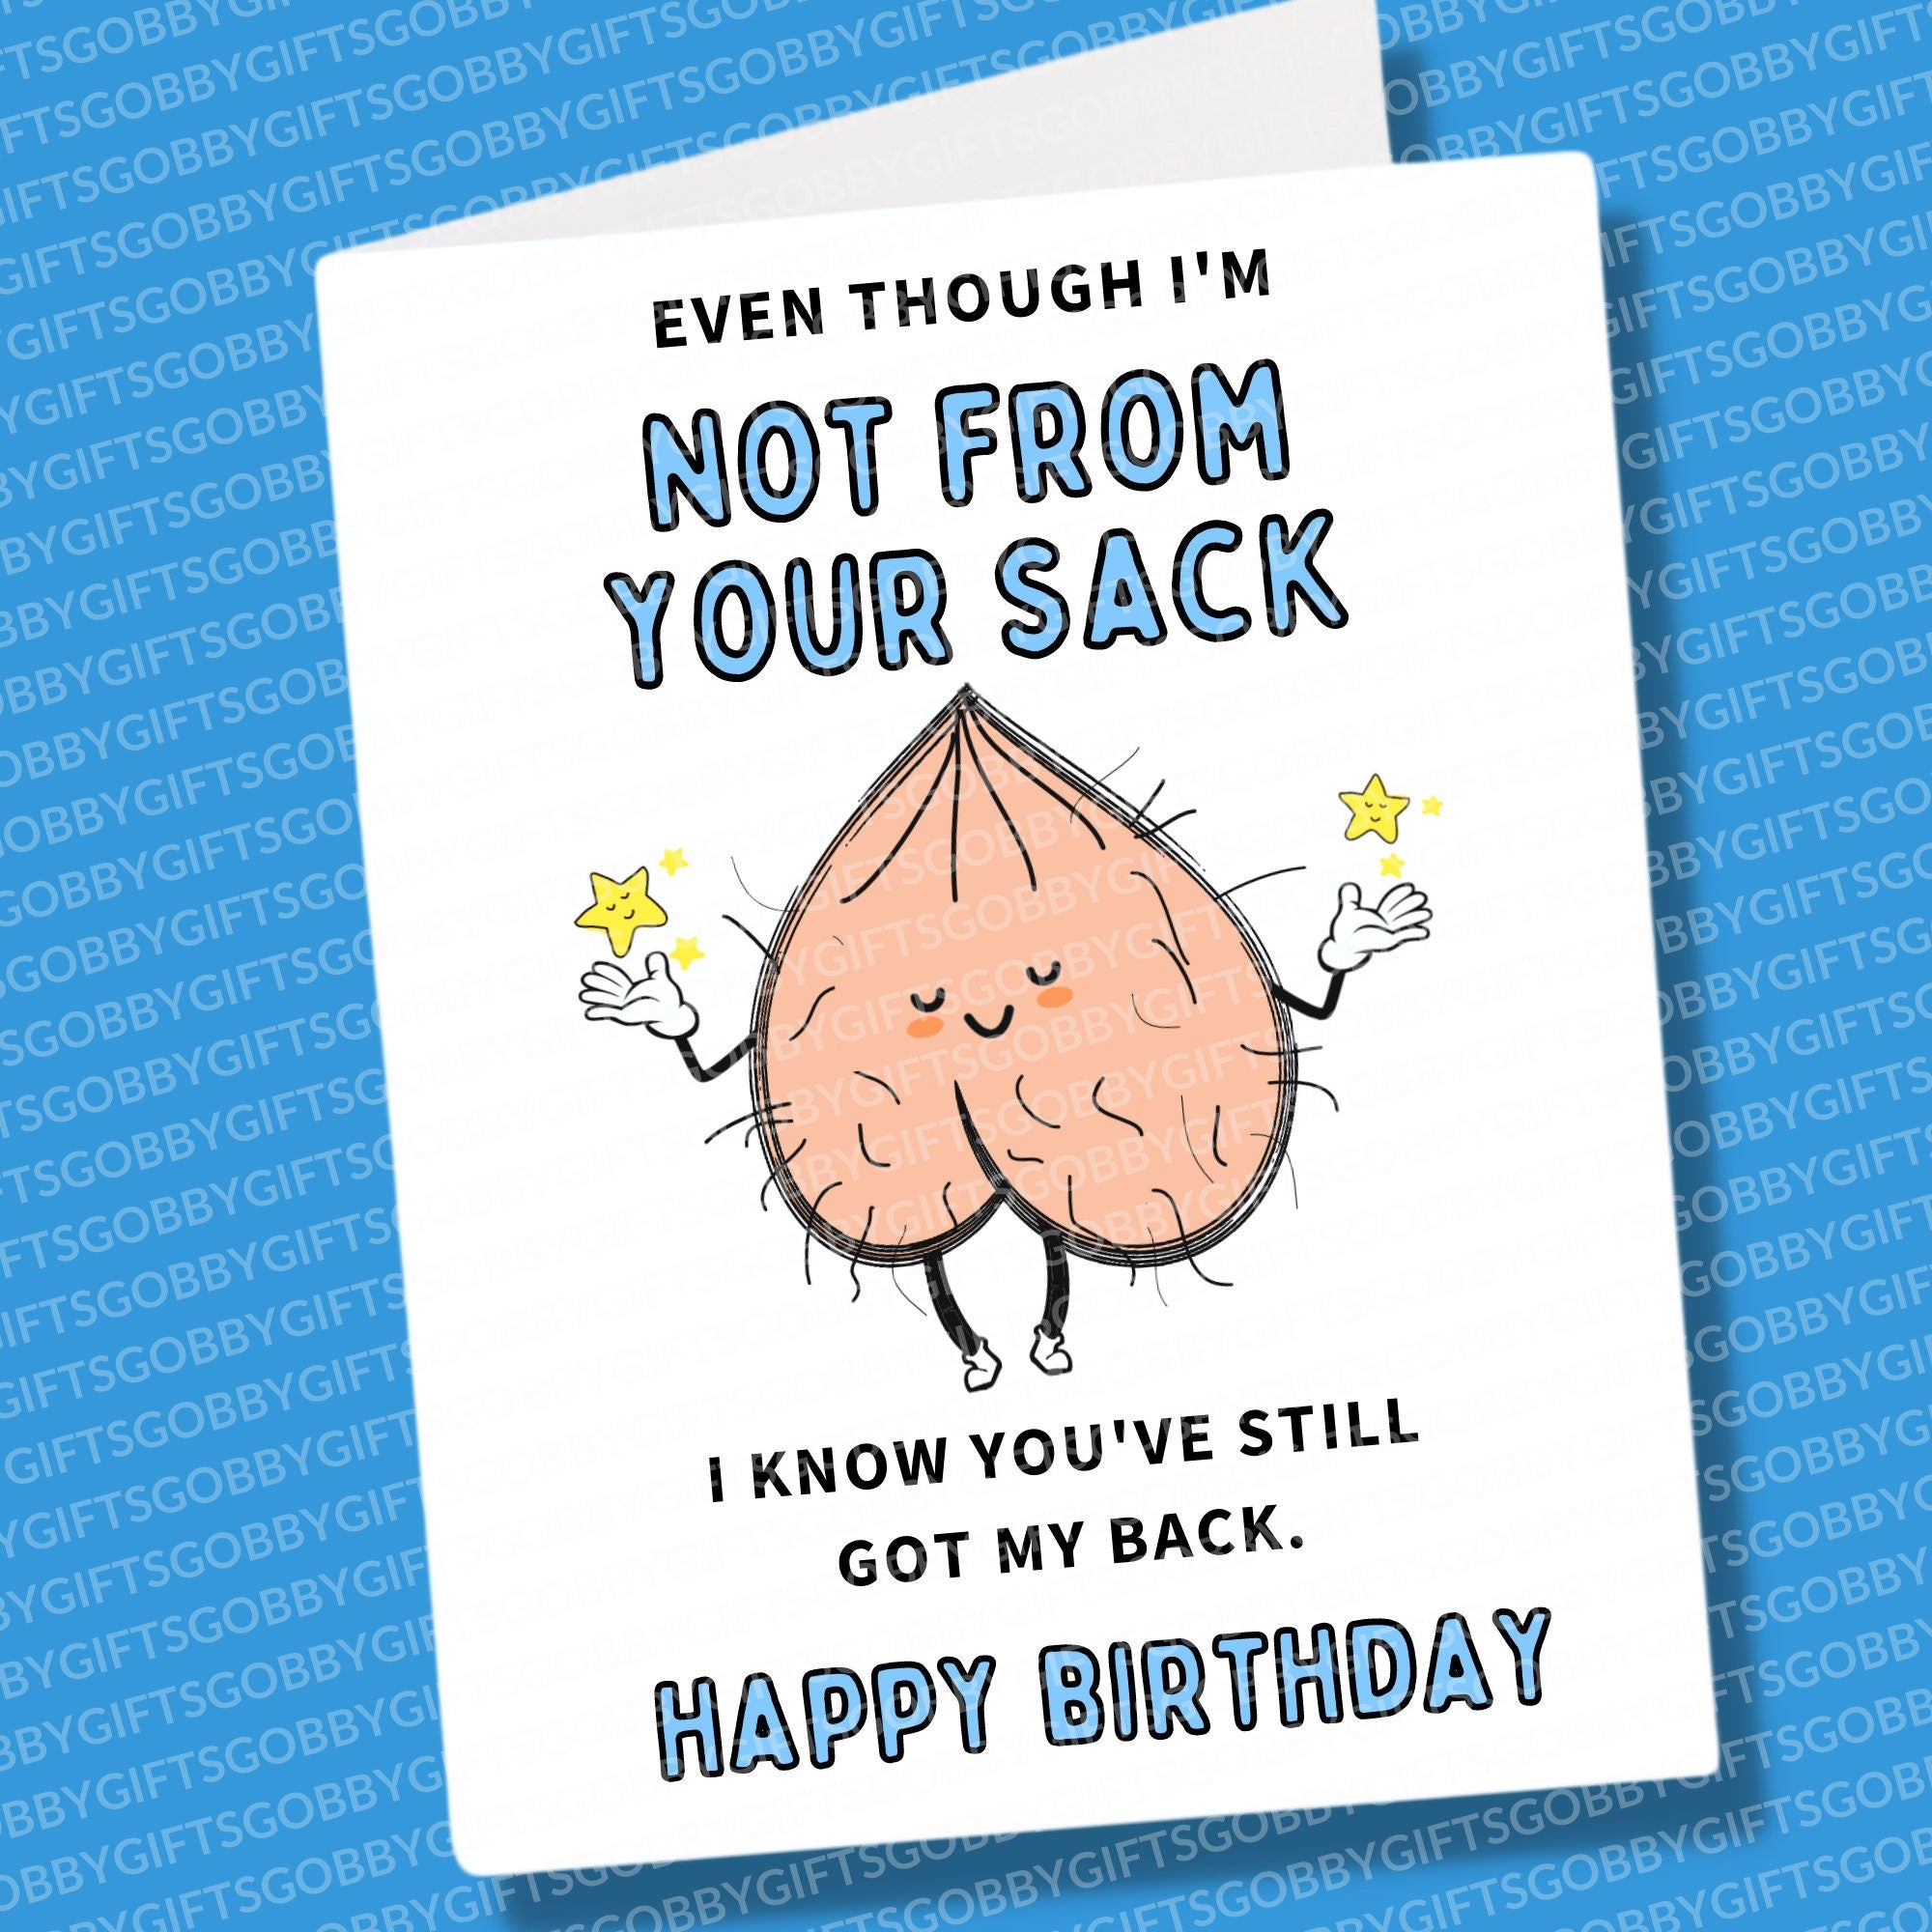 Funny Birthday Card, Not From Your Sack, Still got my back card, Step dad, father card, step dad funny cards, rude funny humour cheeky